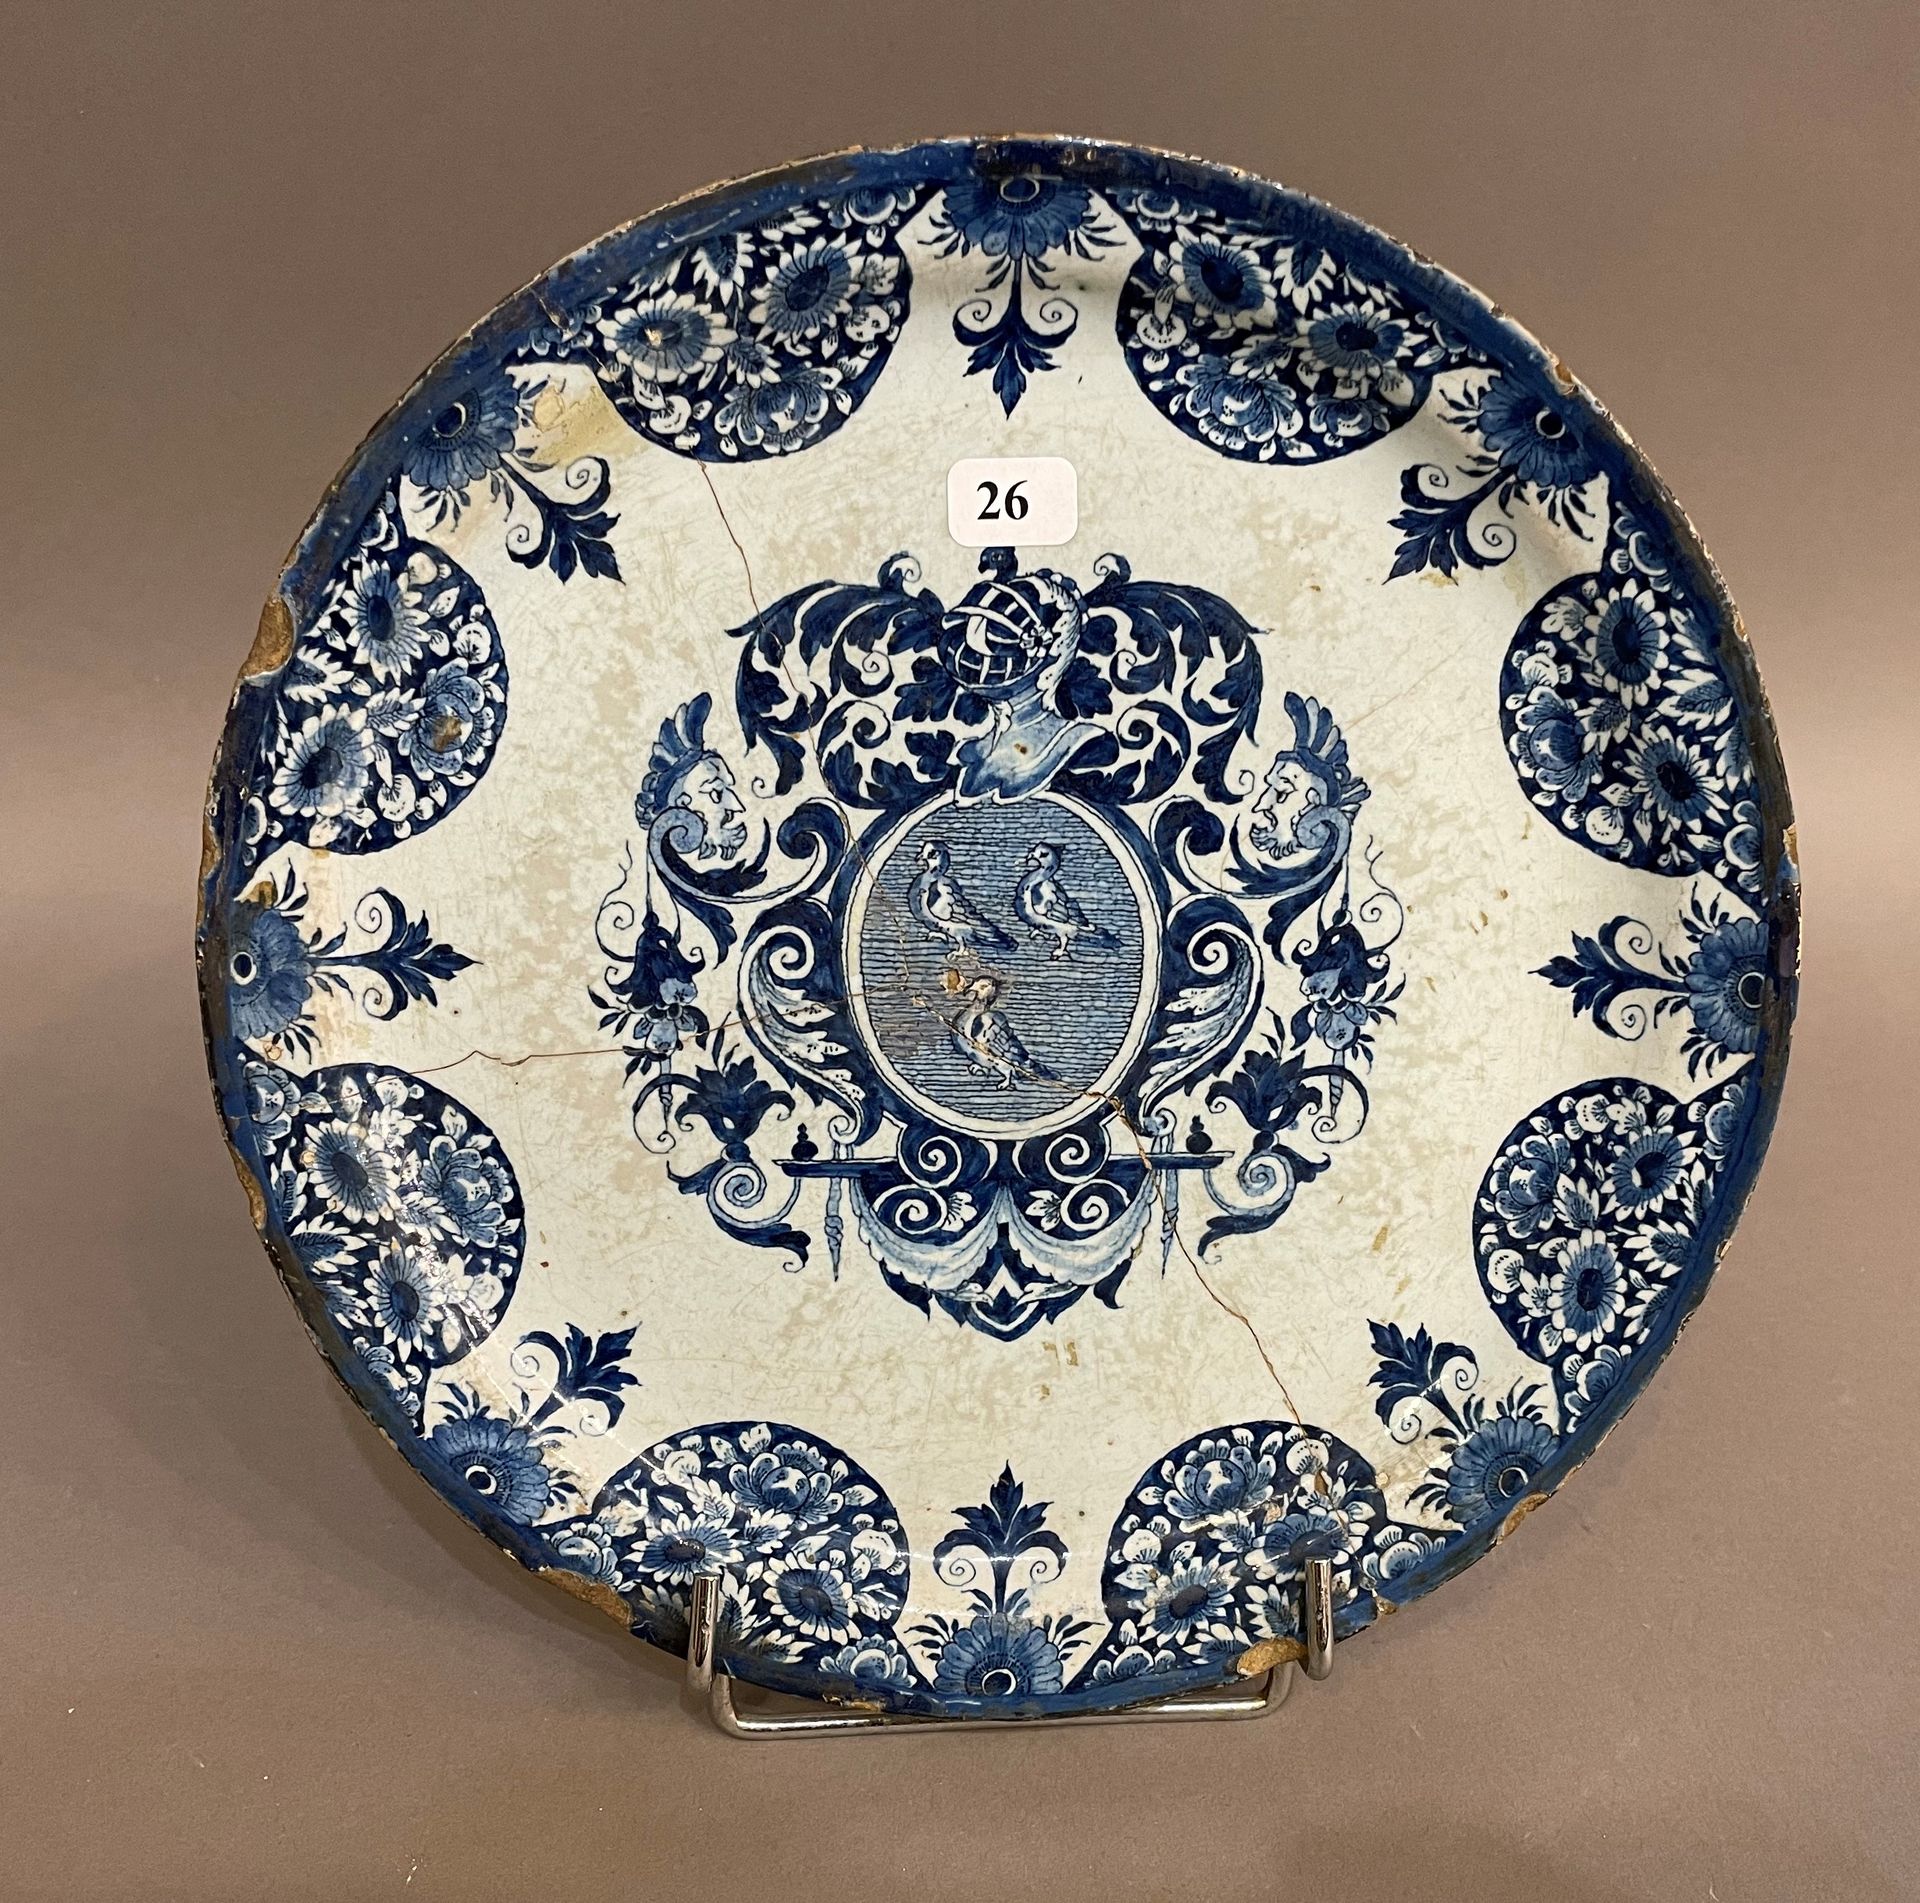 Null Rouen

Earthenware plate decorated with blue monochrome coat of arms in a s&hellip;